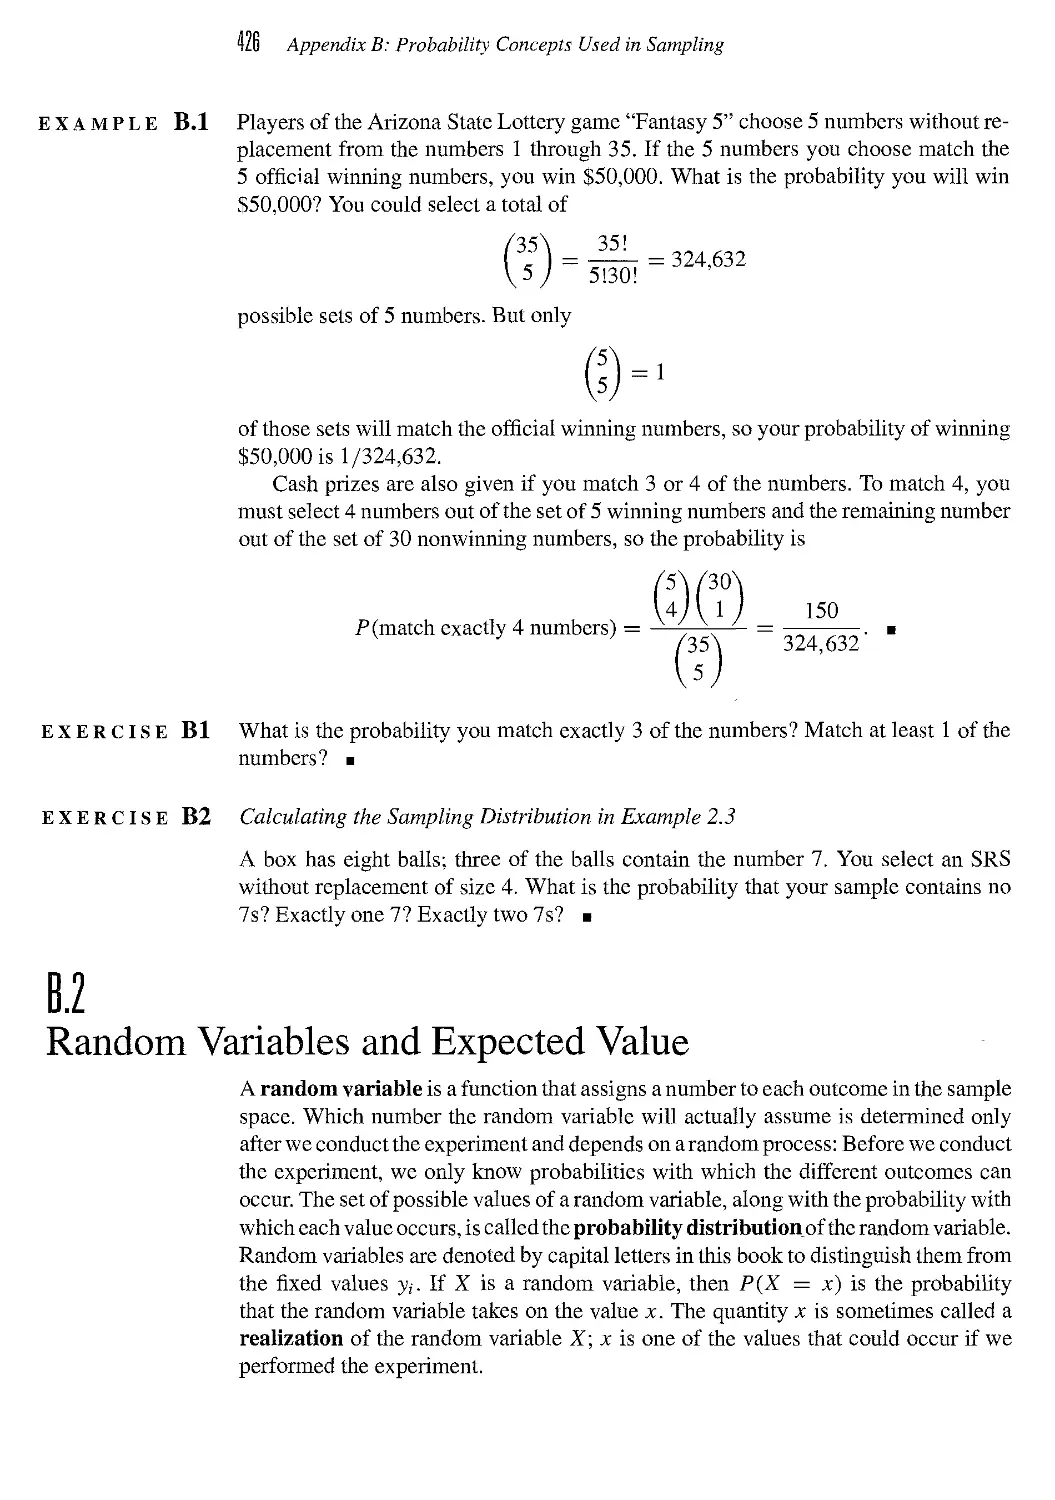 B.2 Random Variables and Expected Value